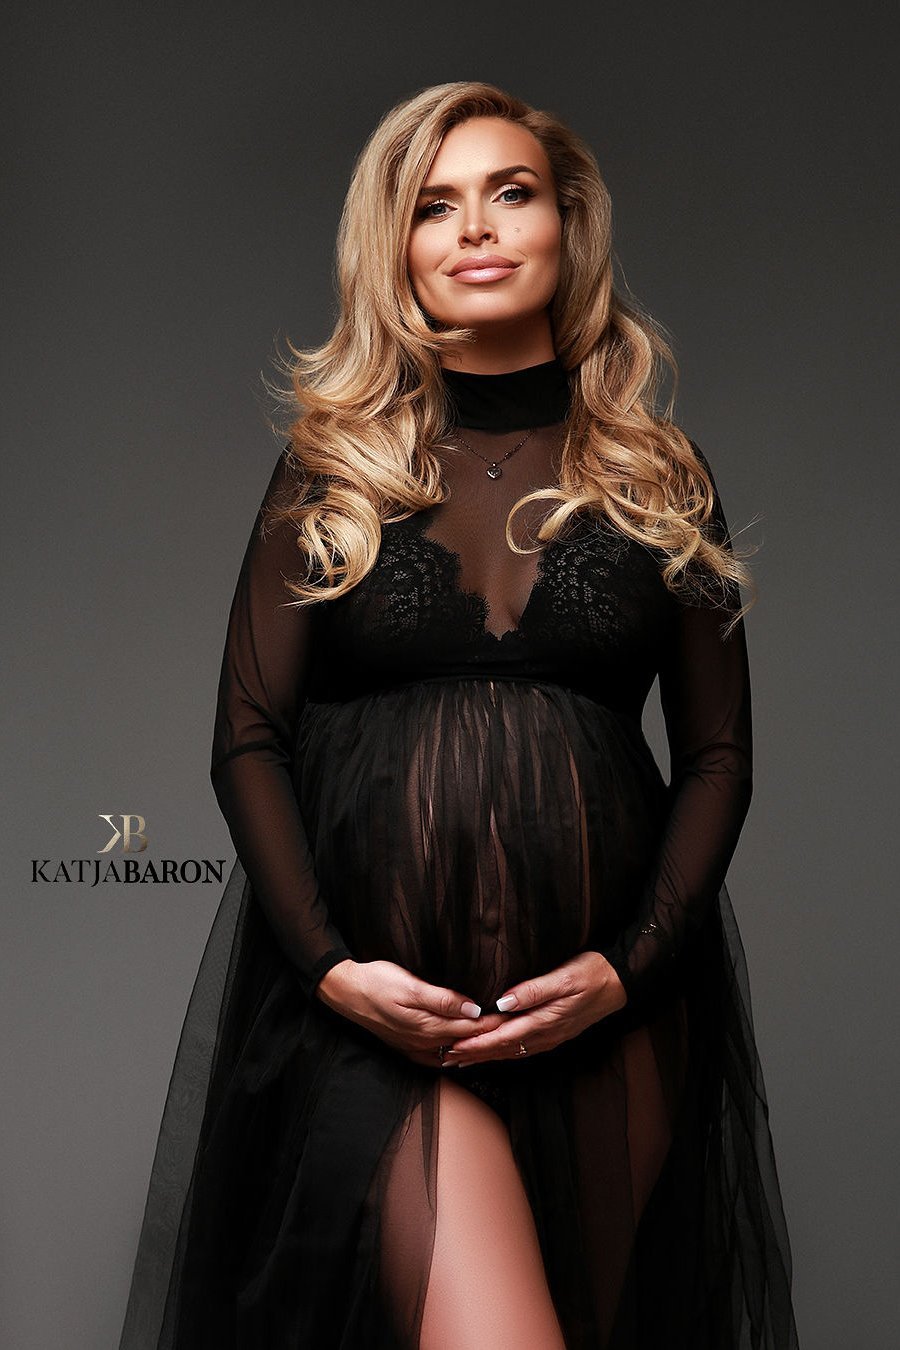 a woman with blonde hair is wearing a black dress. The dress is see trough and made from mesh fabric. The dress has a high turtle neck